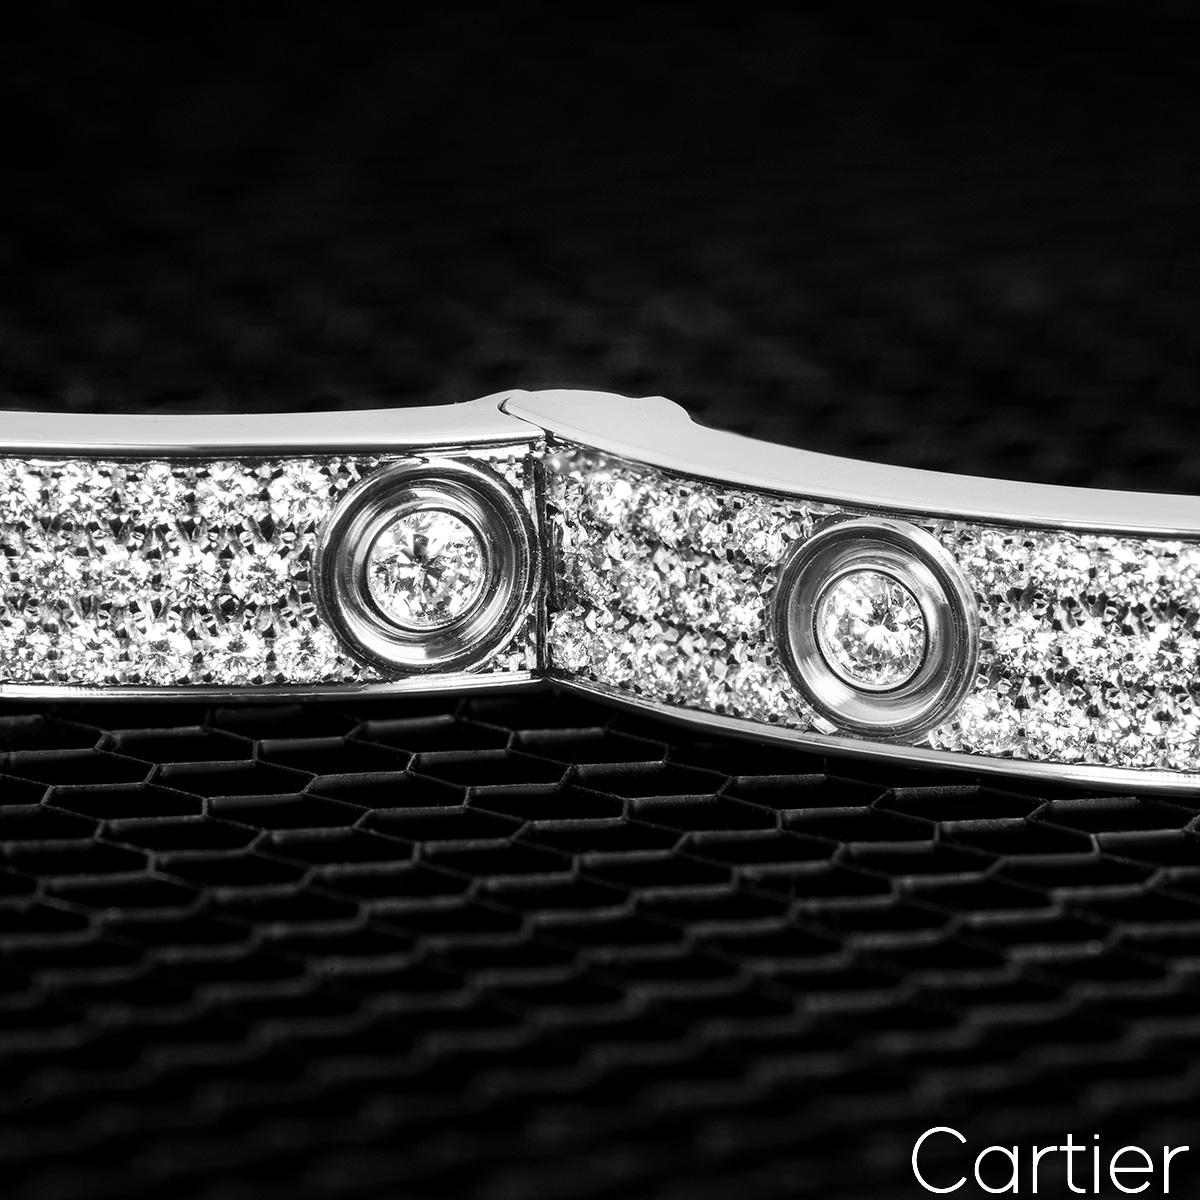 Cartier White Gold Pave Diamond Love Bracelet Size 18 N6033603 In Excellent Condition For Sale In London, GB